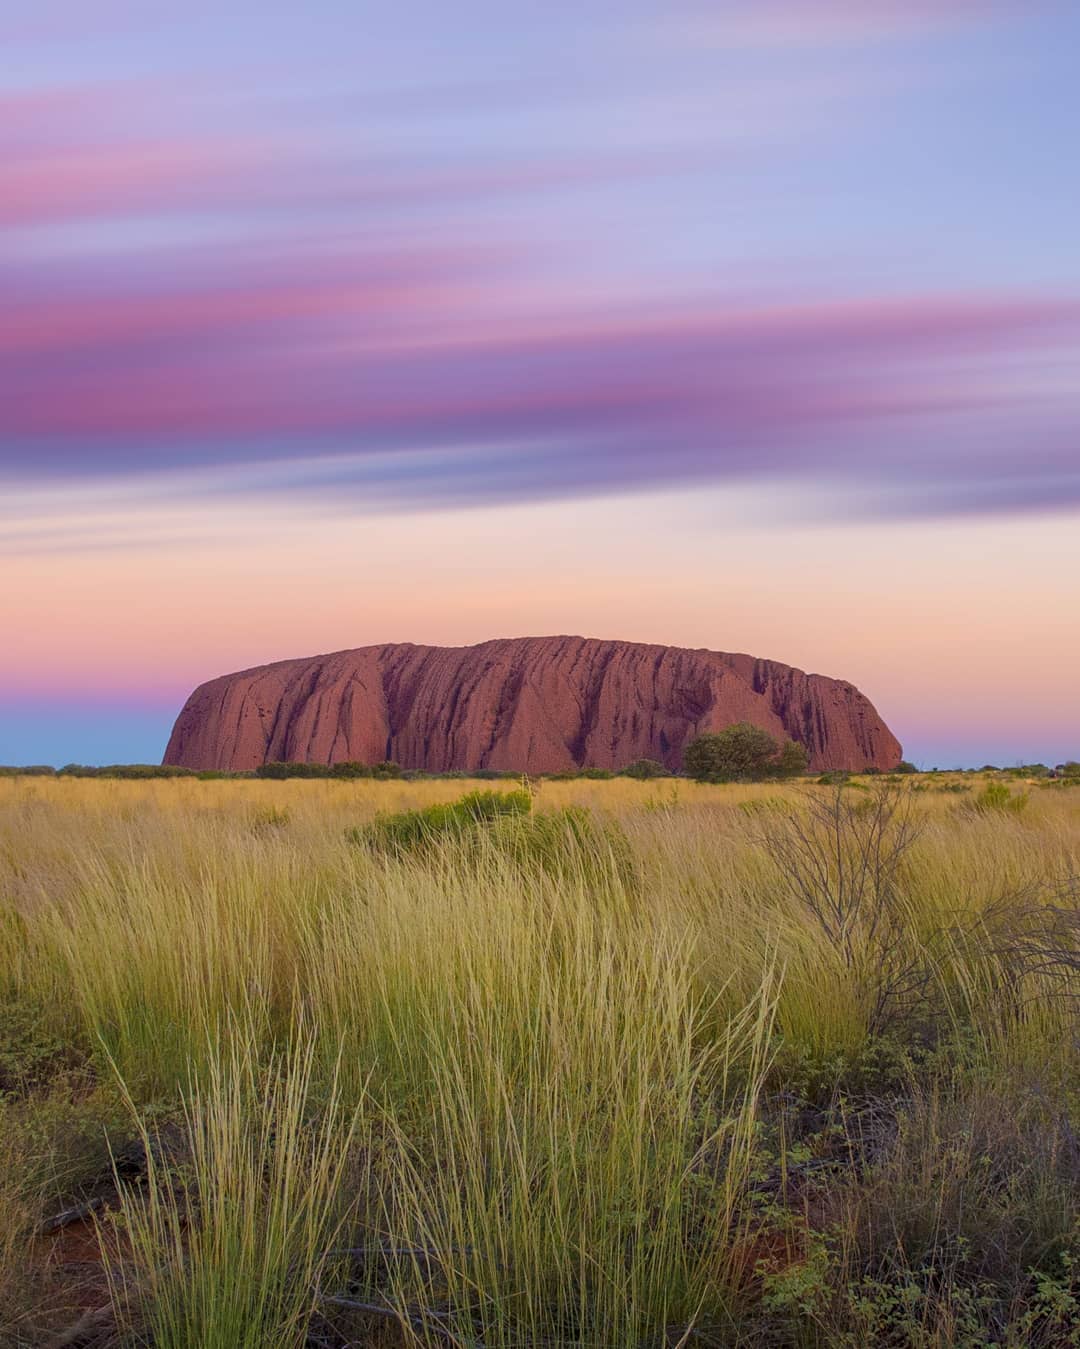 Watching the sun set and clouds cross the horizon above #Uluru in the @ausoutbacknt, arguably the most famous sight in all of Oceania. @australia's Red Centre has been named by @lonelyplanet as number 4 in its #BestinTravel regions of 2019. ⠀
⠀
Travel writer Bill Bryson described Uluru as strangely familiar and we felt the same way. Here was the rock we had seen in movies, postcards and documentaries, a rock that symbolised past conflict and enduring pain, a rock held sacred by Australia’s indigenous people.⠀
⠀
We watched it change colour for what felt like an age. Time well spent. ⠀
-⠀⠀
-⠀⠀
-⠀⠀
-⠀⠀
-⠀⠀
-⠀⠀
#Australia #seeaustralia #Uluru #exploreuluru #ayersrock #ulurukatatjutanationalpark #ulurusunrise #ulurusunset #visituluru #visitaustralia #northernterritory #visitnorthernterritory #ntaustralia #northernterritoryaustralia #katatjuta #alicesprings #therocktour #theoutback #outback #outbackaustralia #takeahike #travelawesome #lpPathfinders #exploreuluru #NTaustralia #redcentre @therocktournt